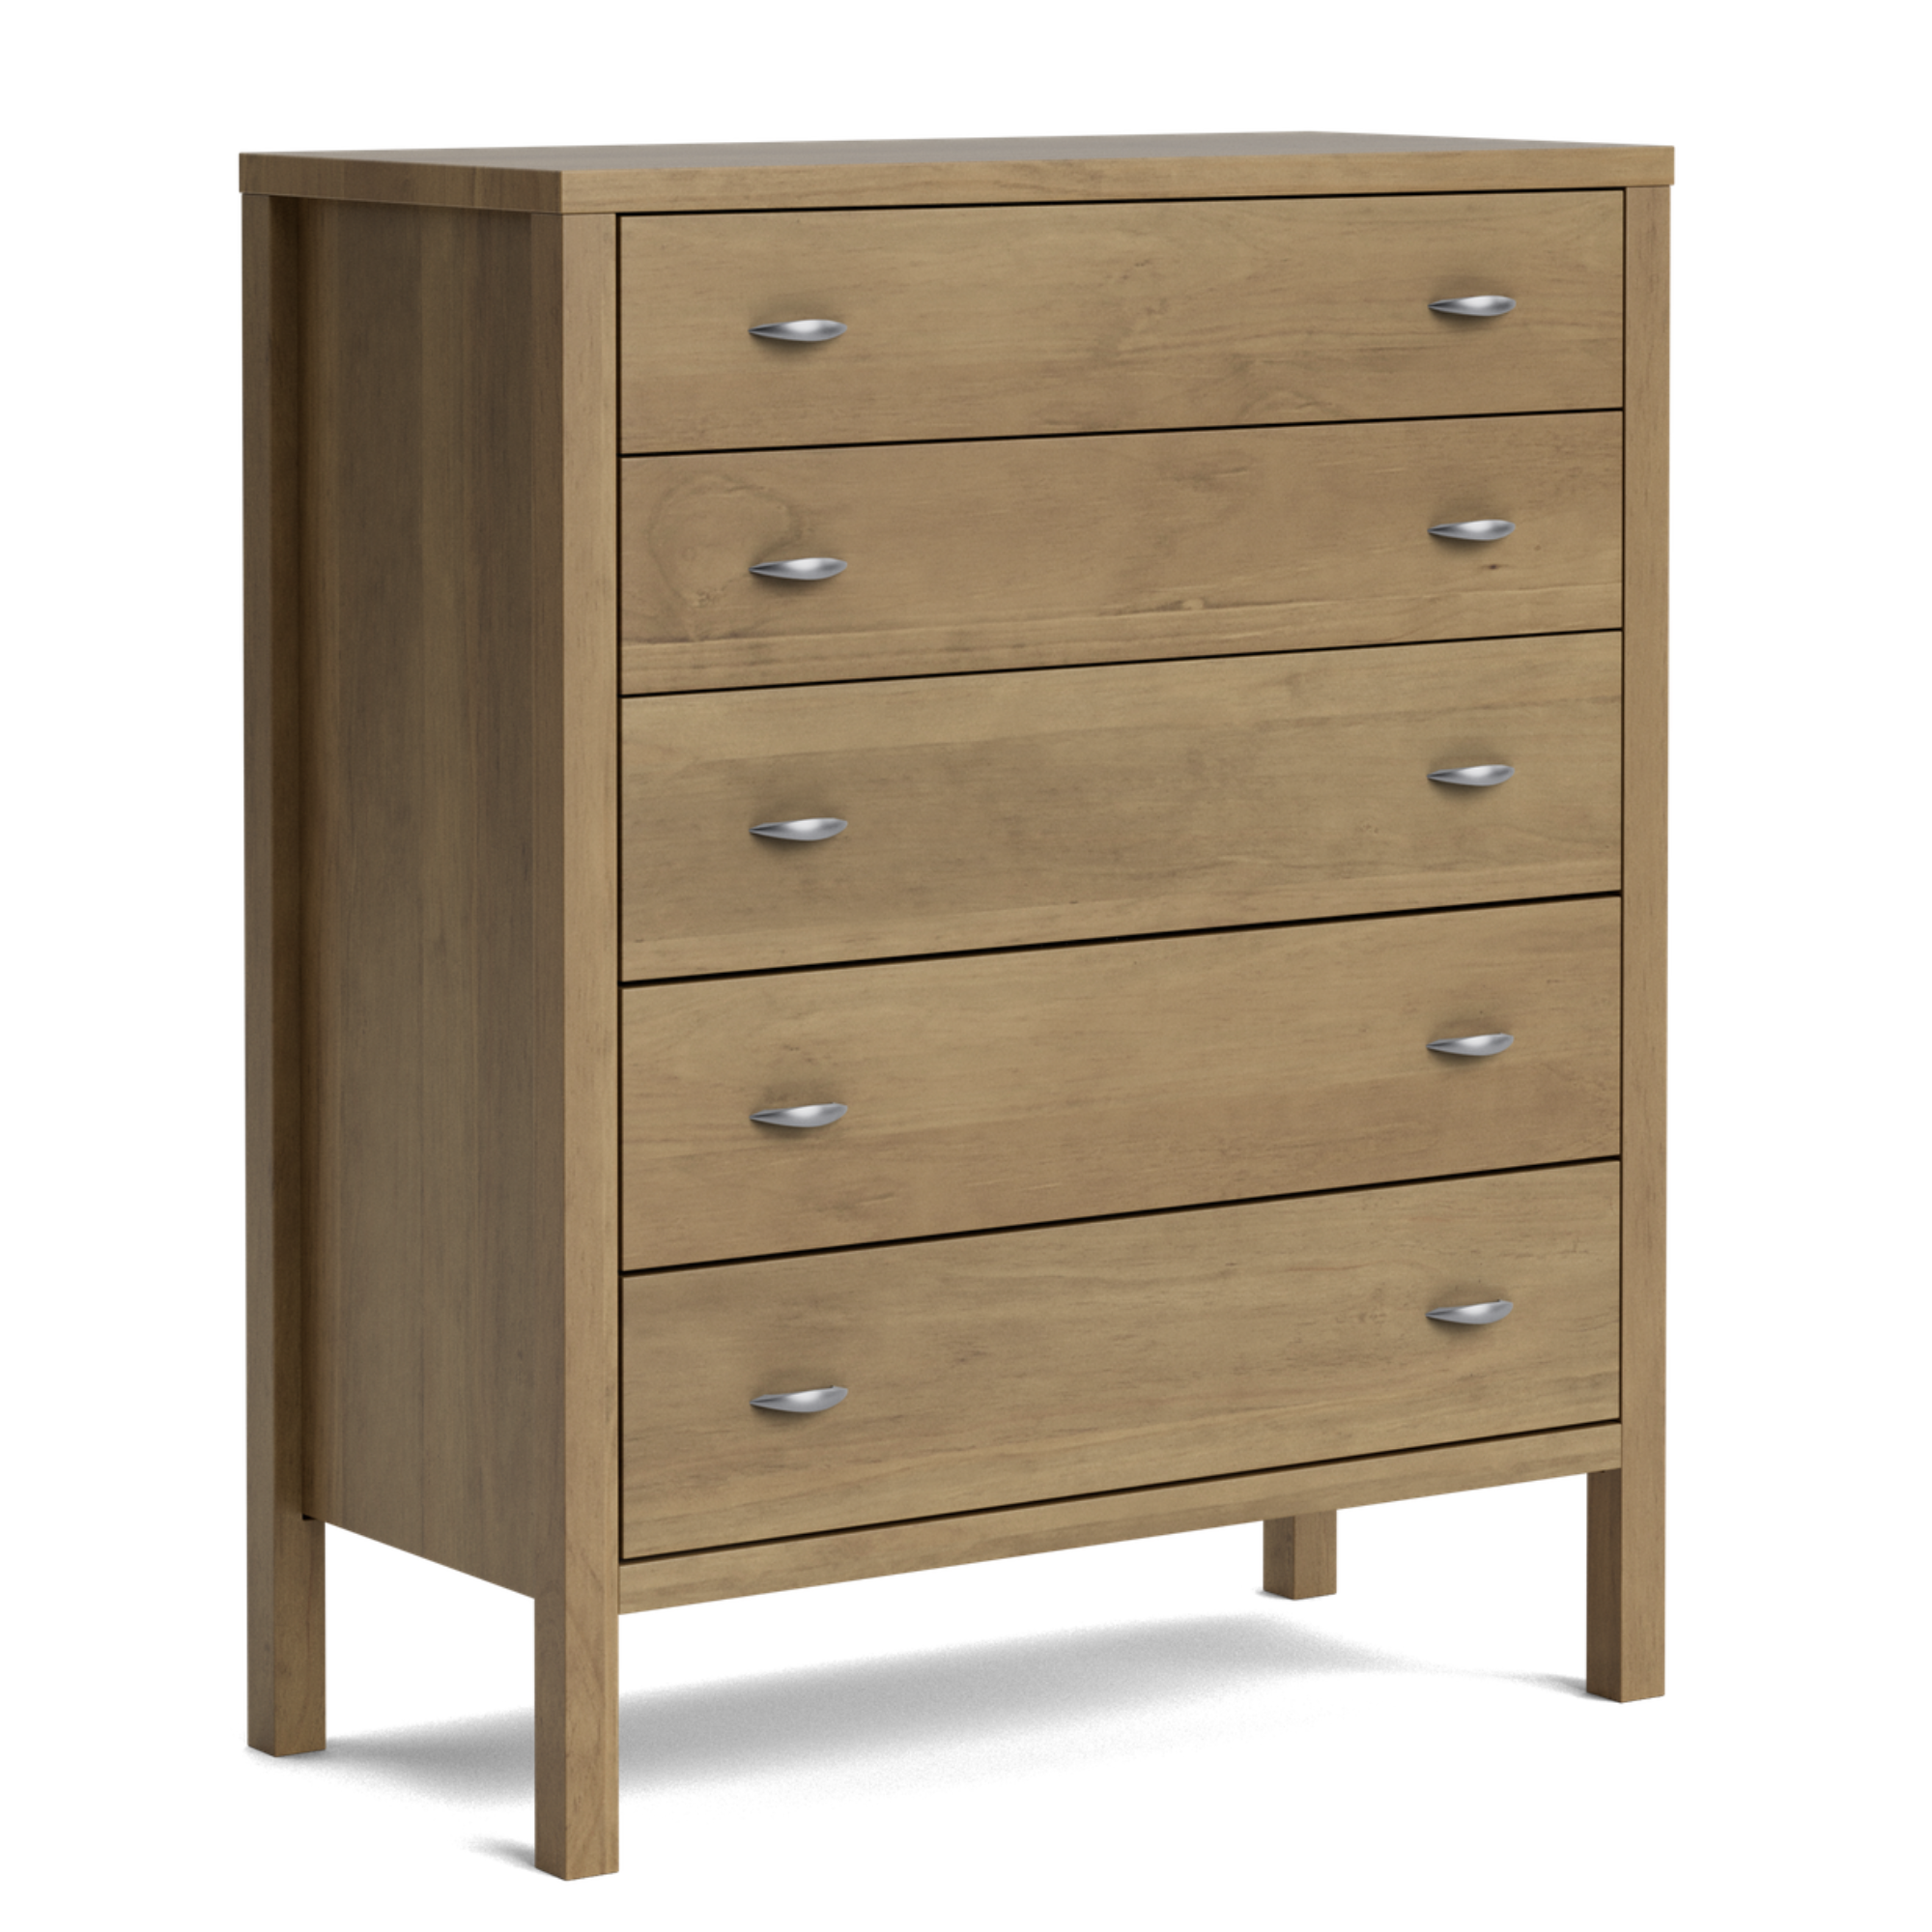 ANDES 5 DRAWER TALLBOY | NZ PINE OR AMERICAN ASH | NZ MADE